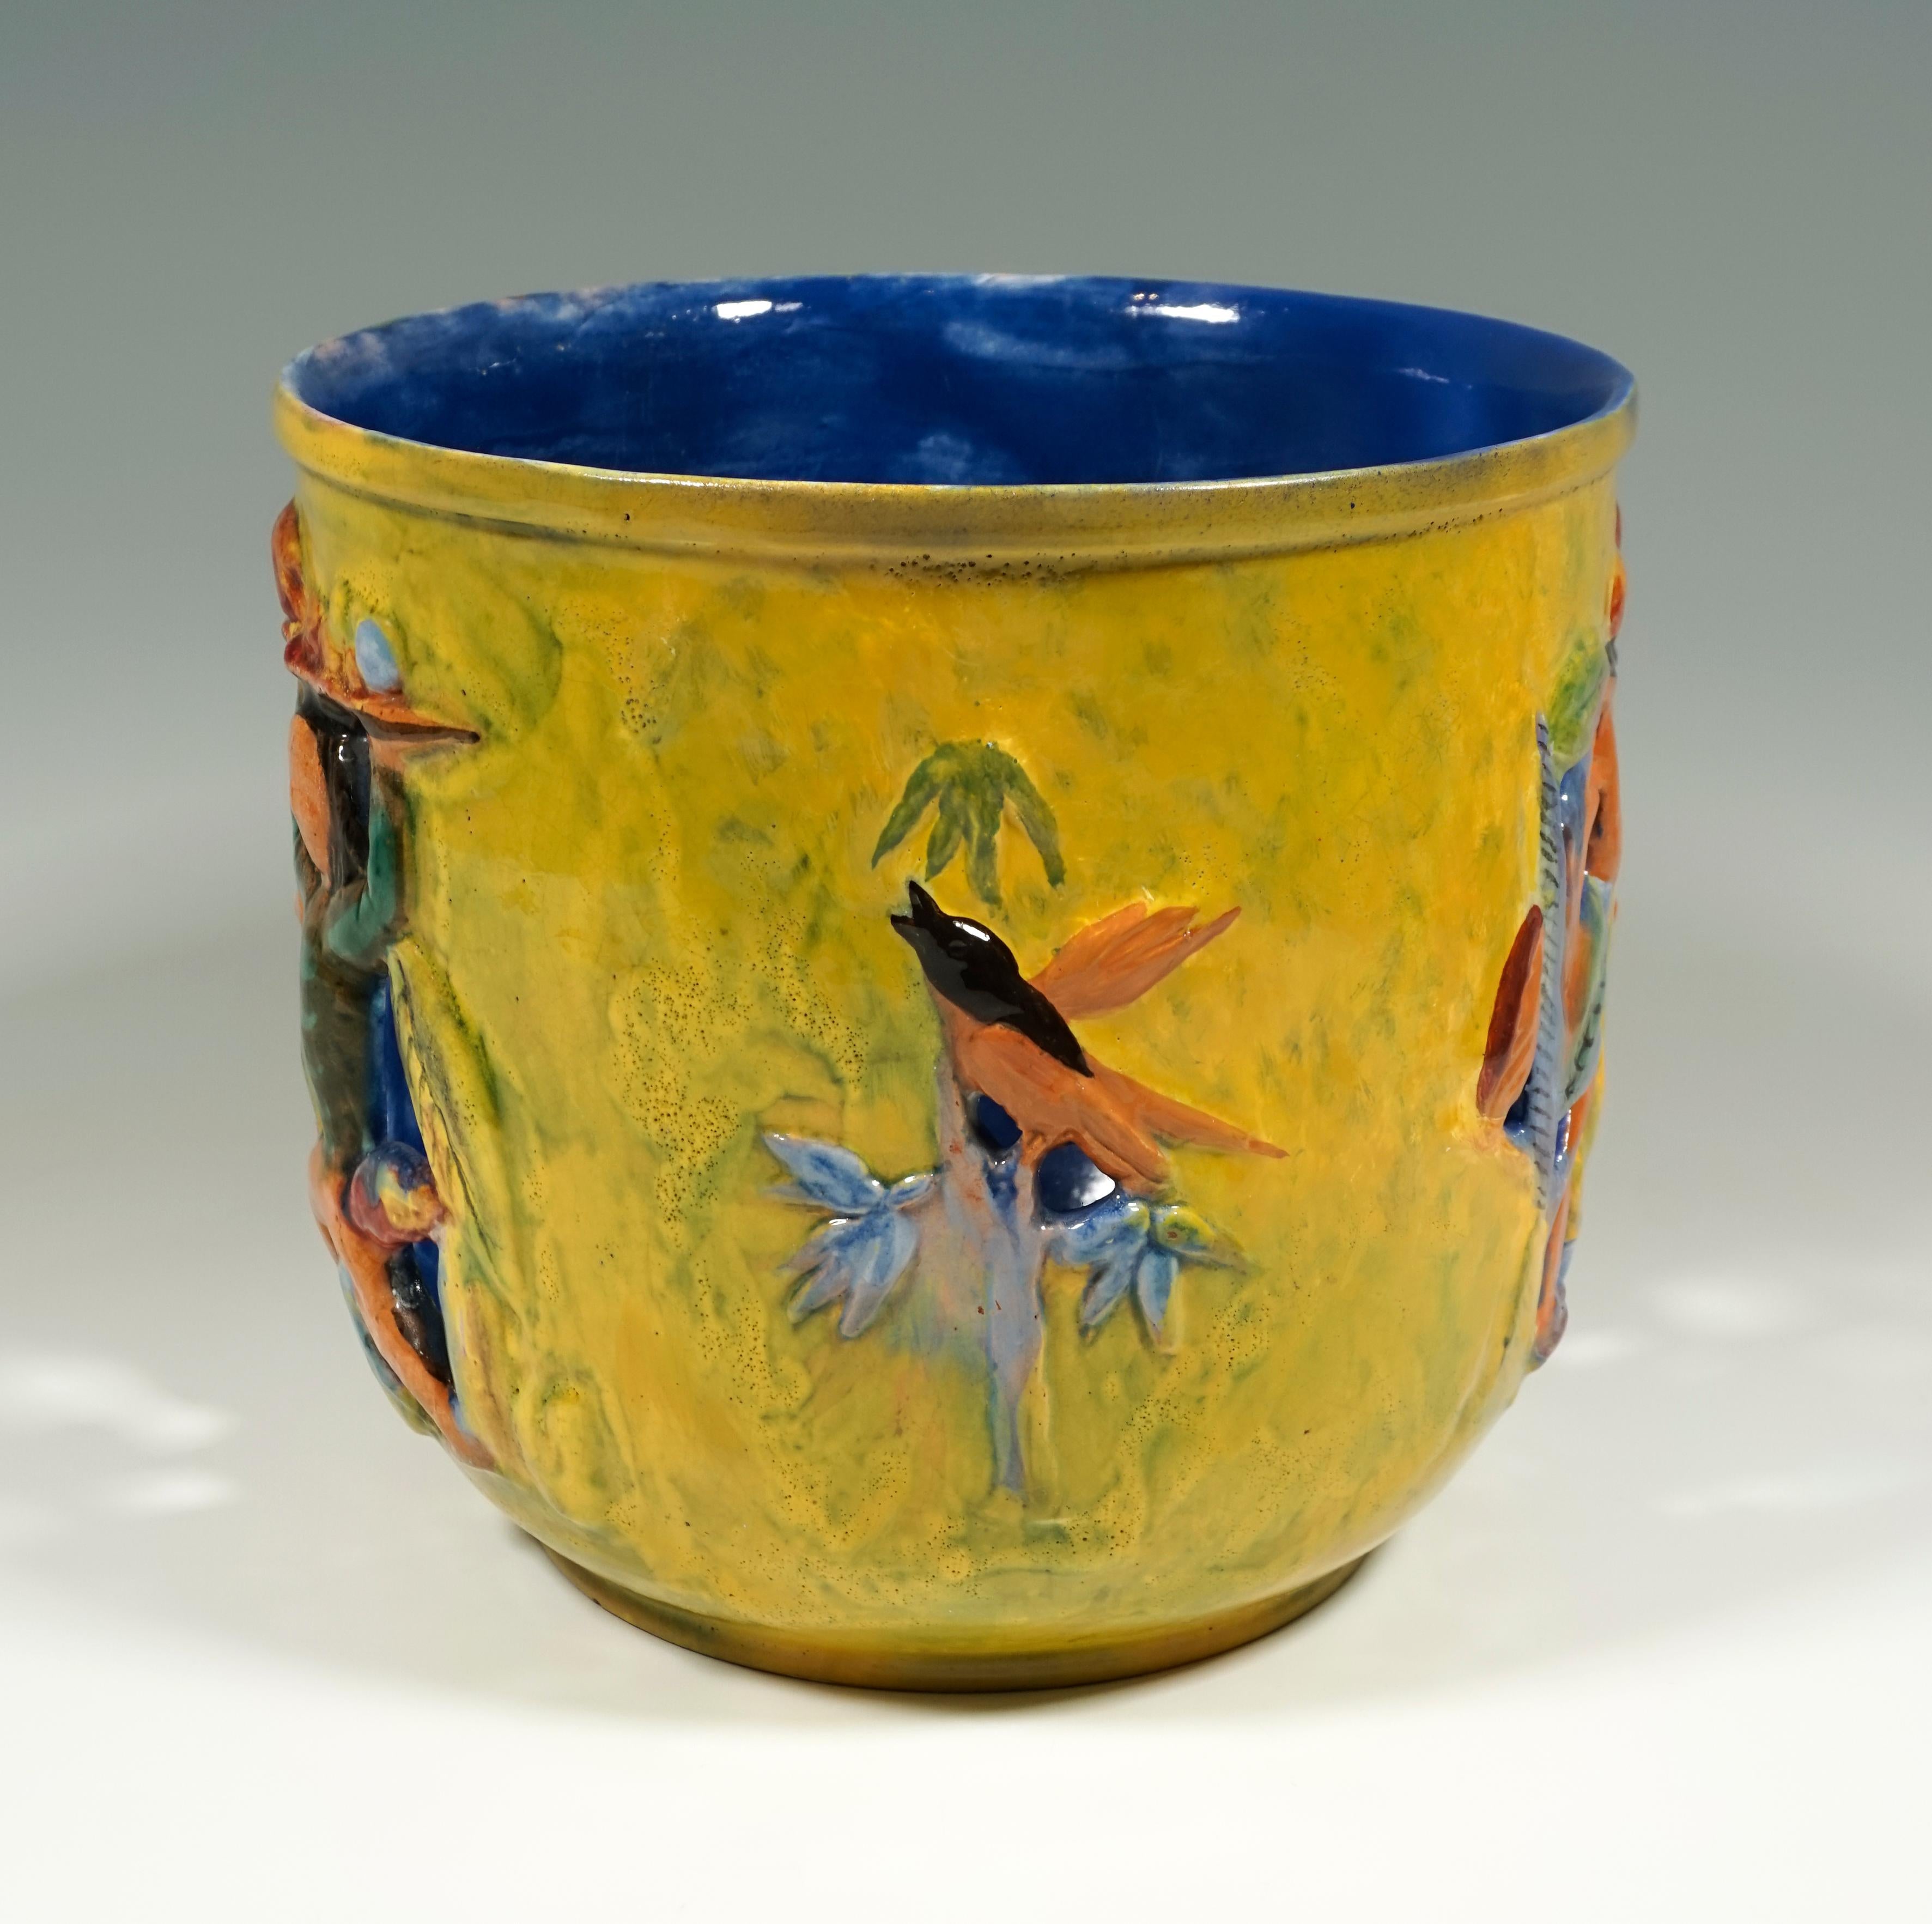 Cylindrical flower pot with breakthrough and relief-like shape of female figures carrying fruit bowls on their heads and plants with birds, painted in bright colors.

Manufactory: 'Wiener Werkstätte' /- 'Vienna Workshop'
Dating: made